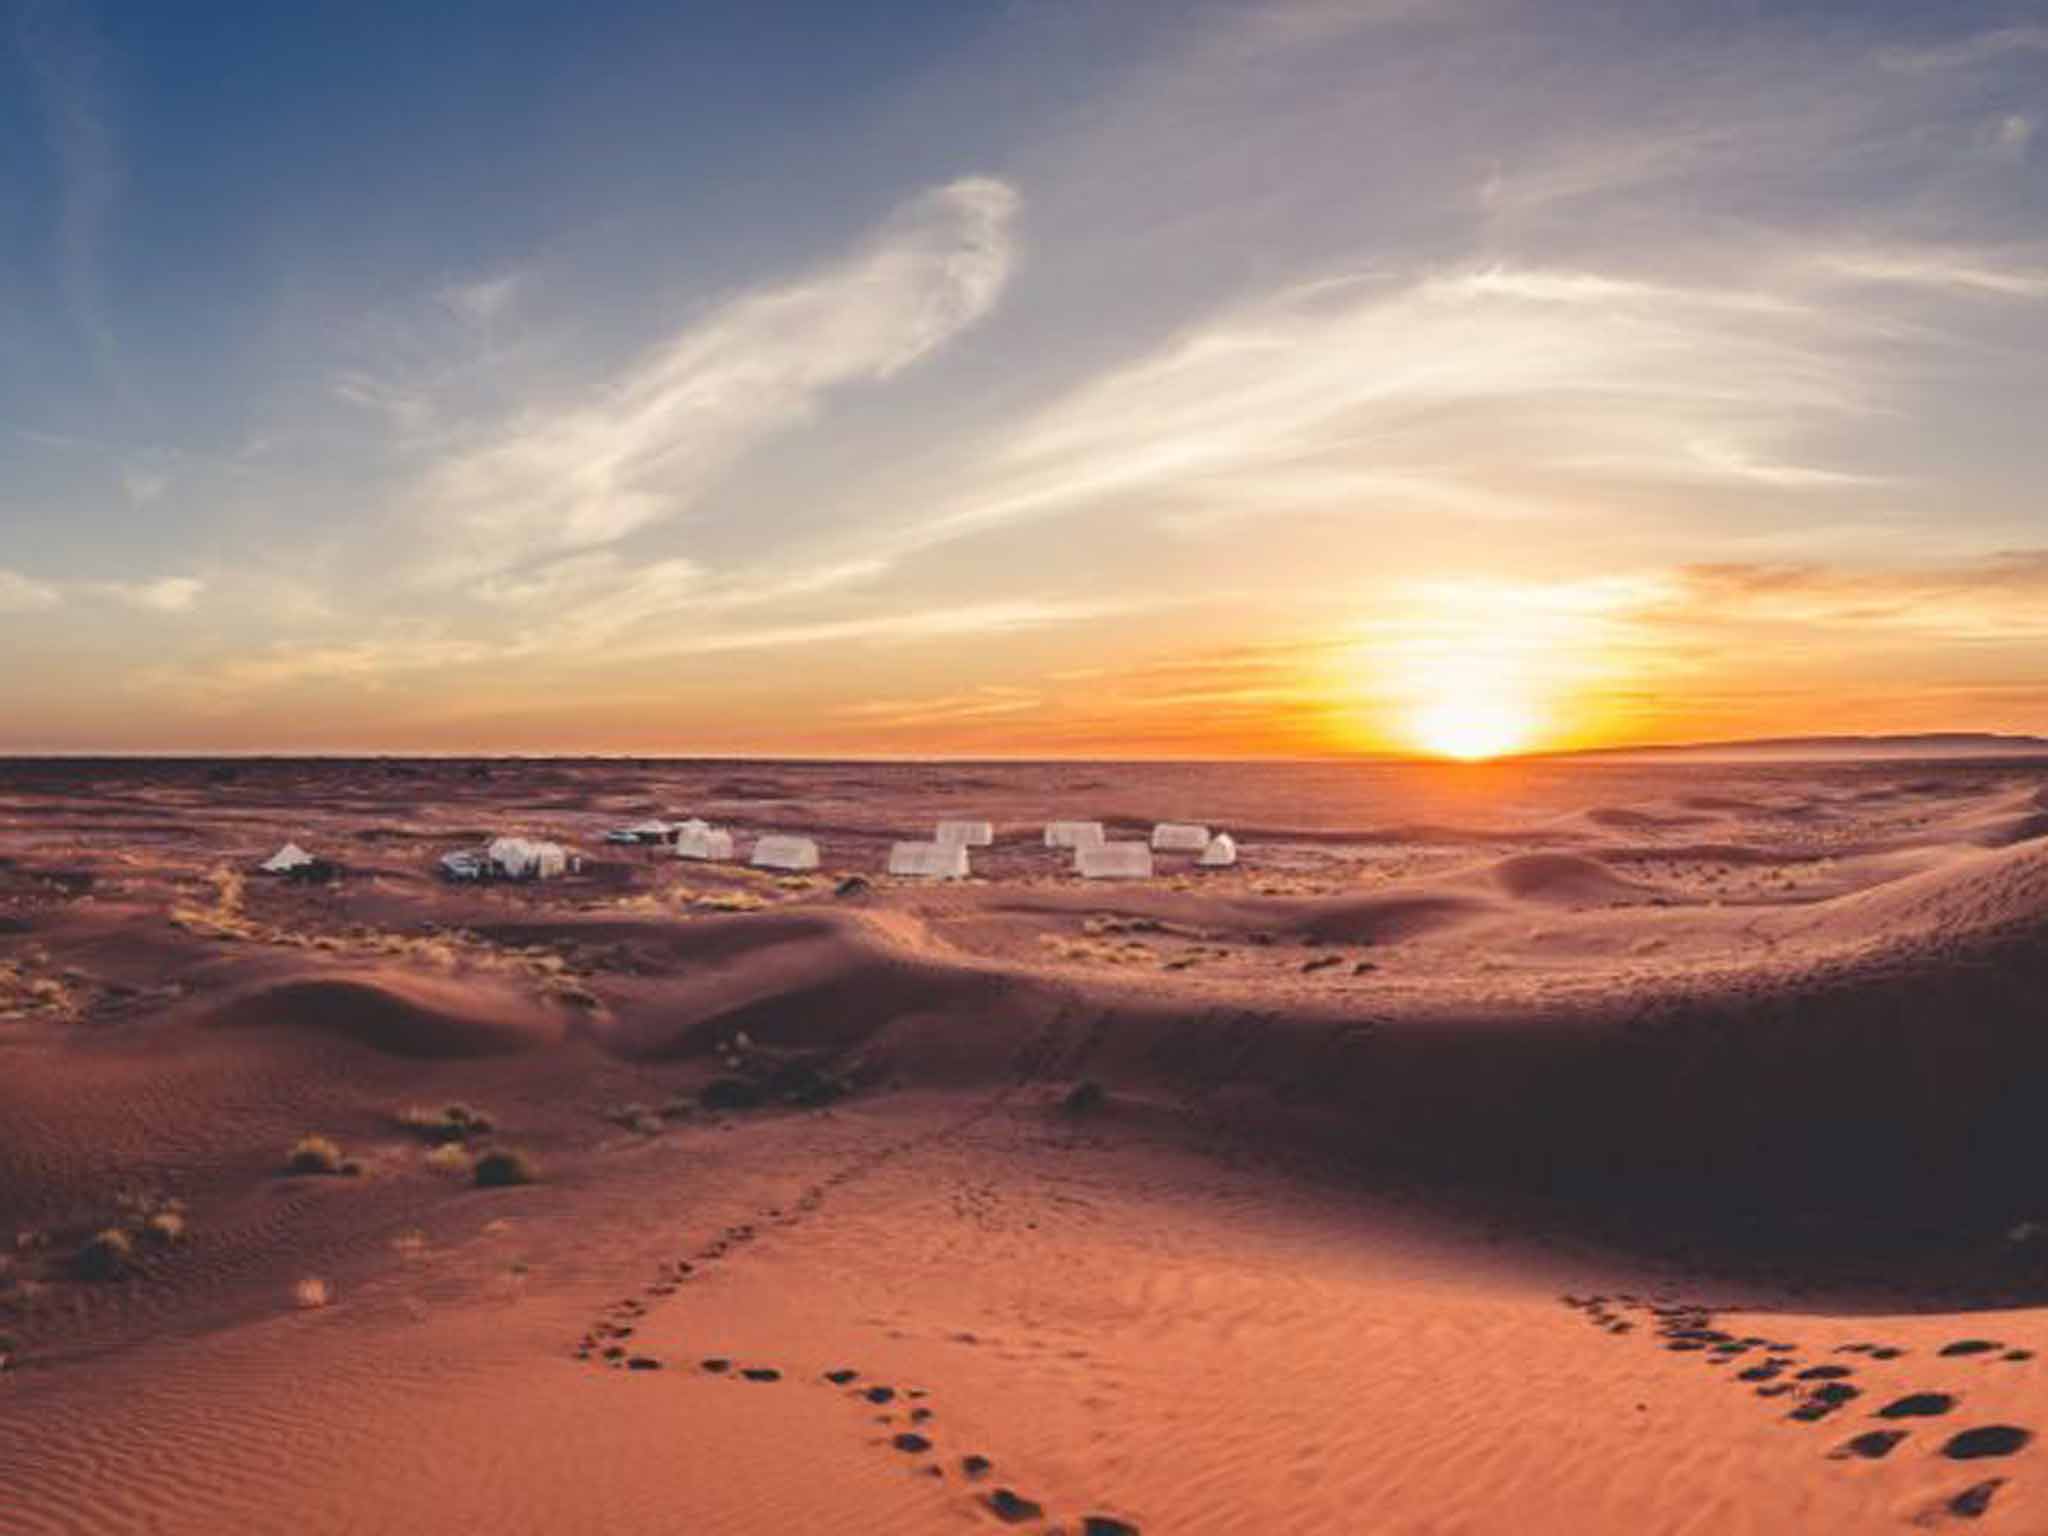 The inaugural edition of Beyond, a festival combining adventure and music, will take place in Morocco's Sahara desert from 26-29 February 2016